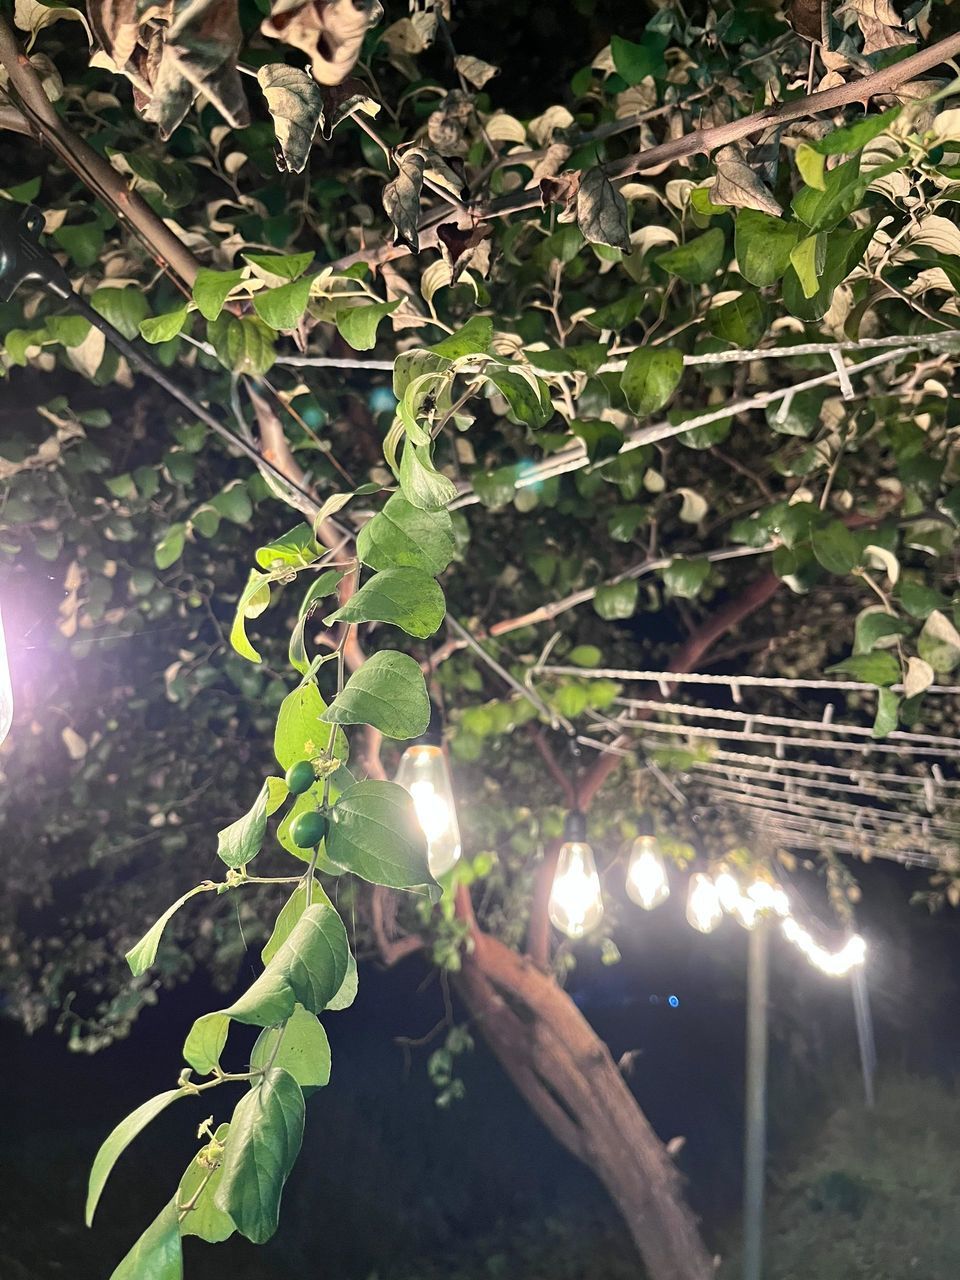 plant, tree, nature, branch, growth, leaf, plant part, flower, green, no people, sunlight, outdoors, produce, lens flare, beauty in nature, illuminated, day, food and drink, food, freshness, land, healthy eating, fruit